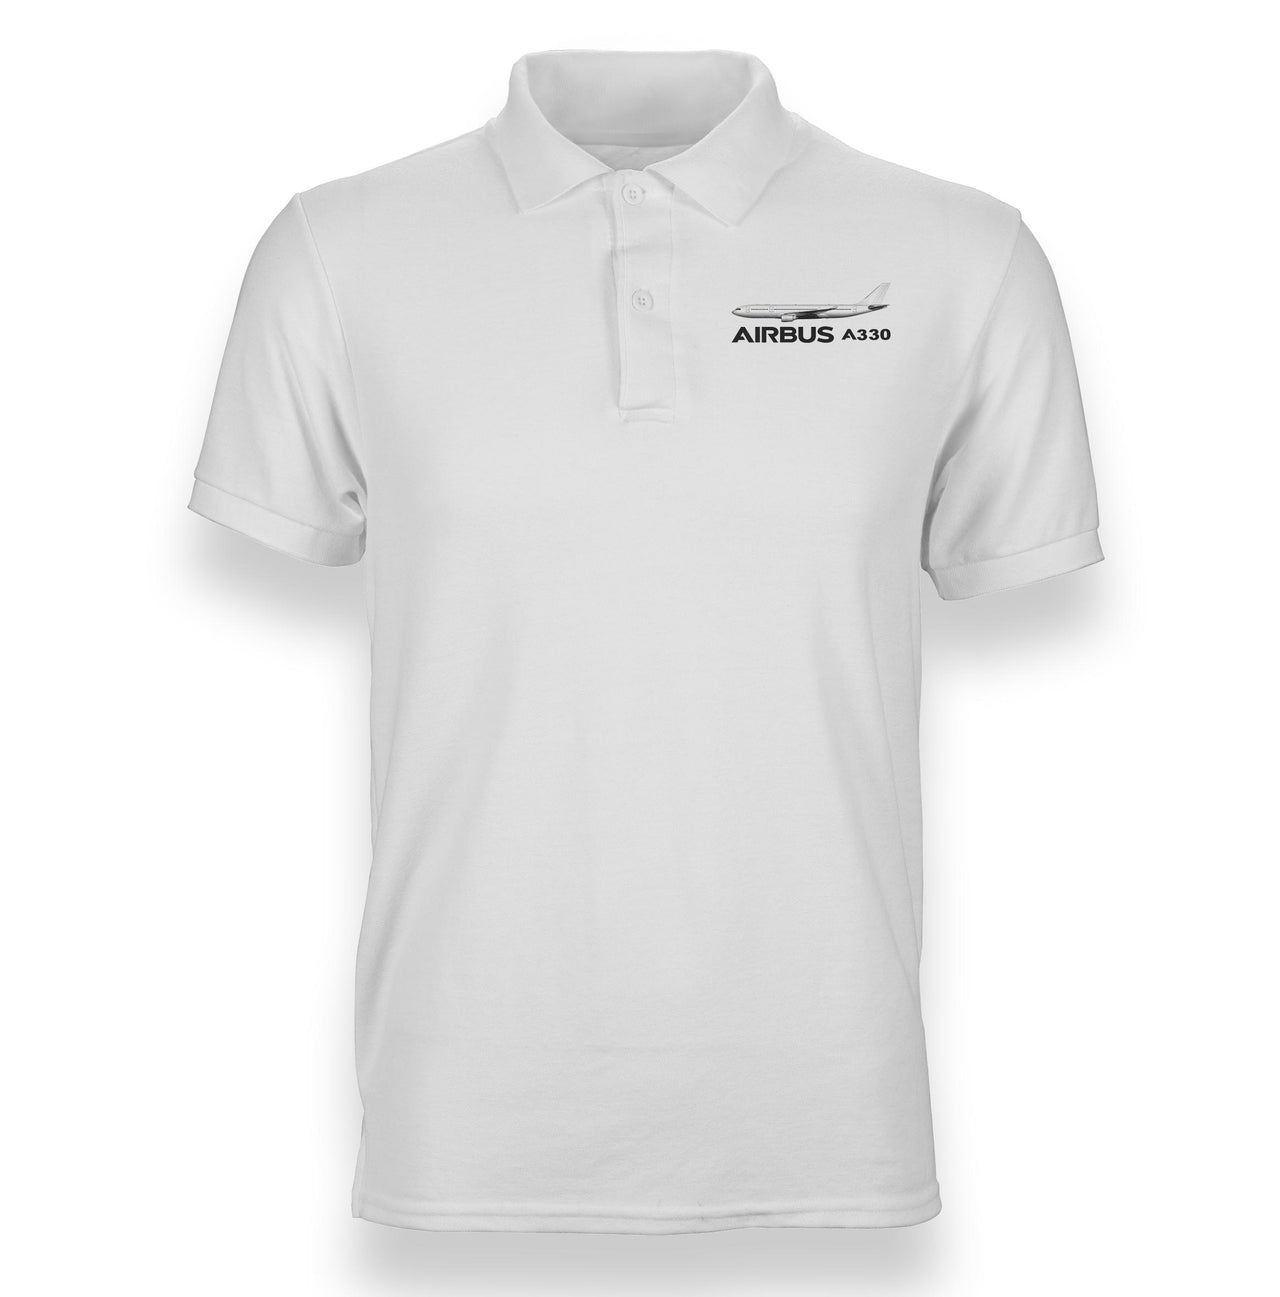 The Airbus A330 Designed Polo T-Shirts